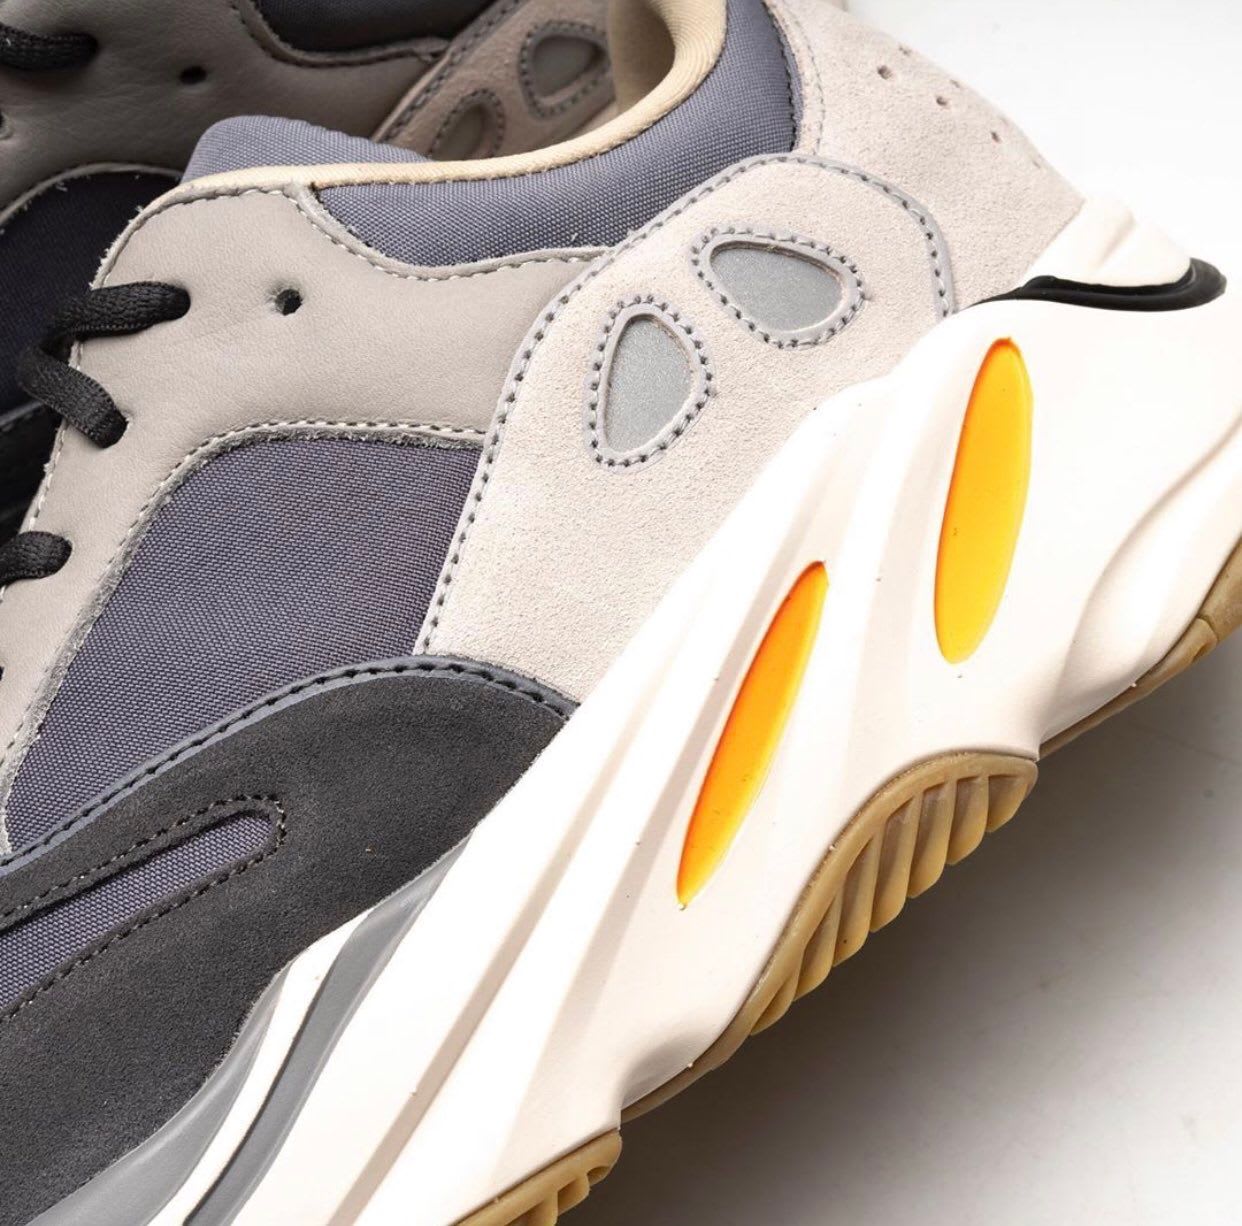 Adidas Yeezy Boost 700 'Magnet' (Detail)